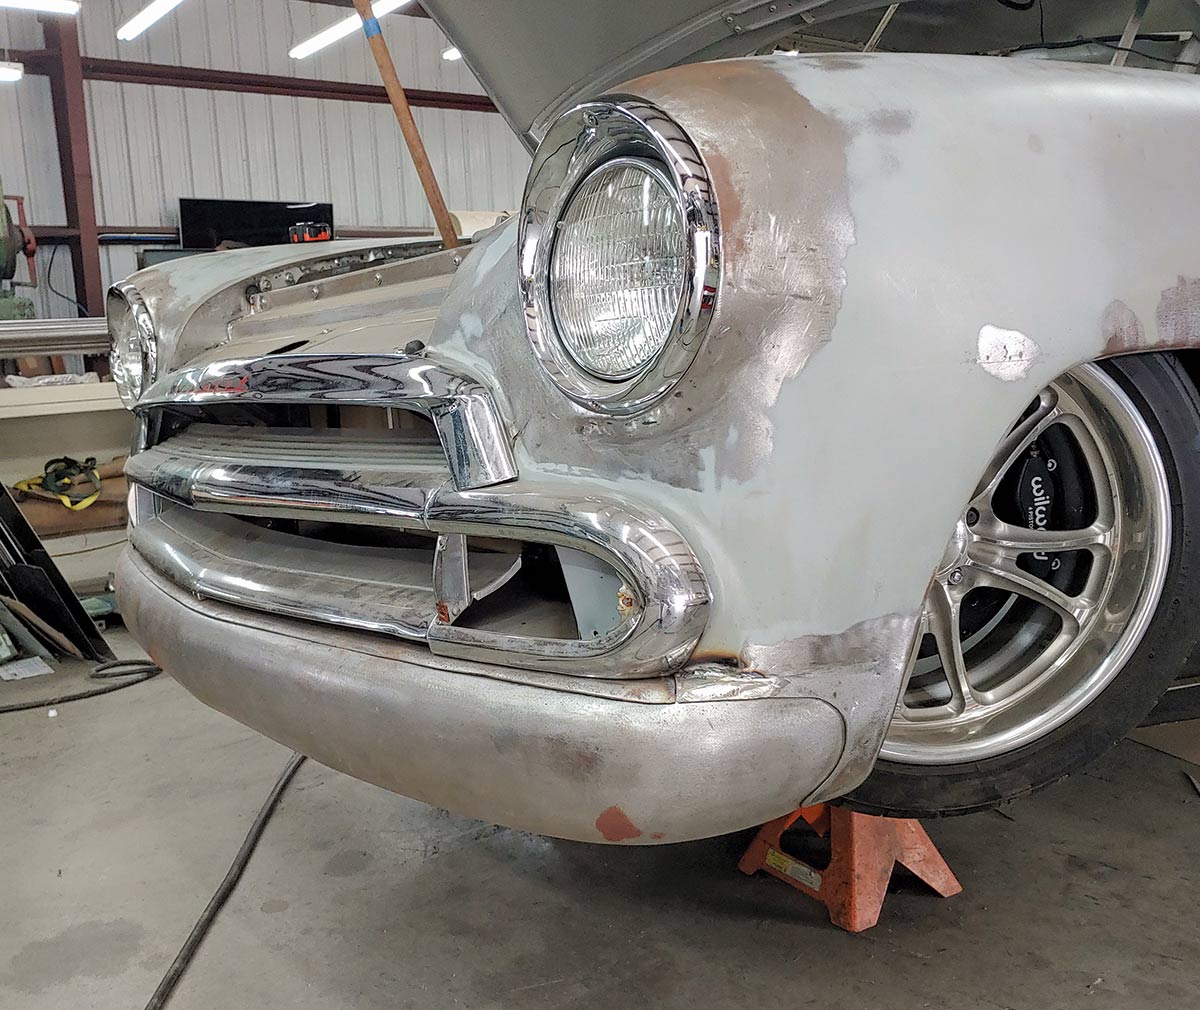 Here we see the finished modification. The ’55 Olds headlight rings are elegant and provide the perfect recess for the seal beam headlights. Note the beautifully tucked front bumper.